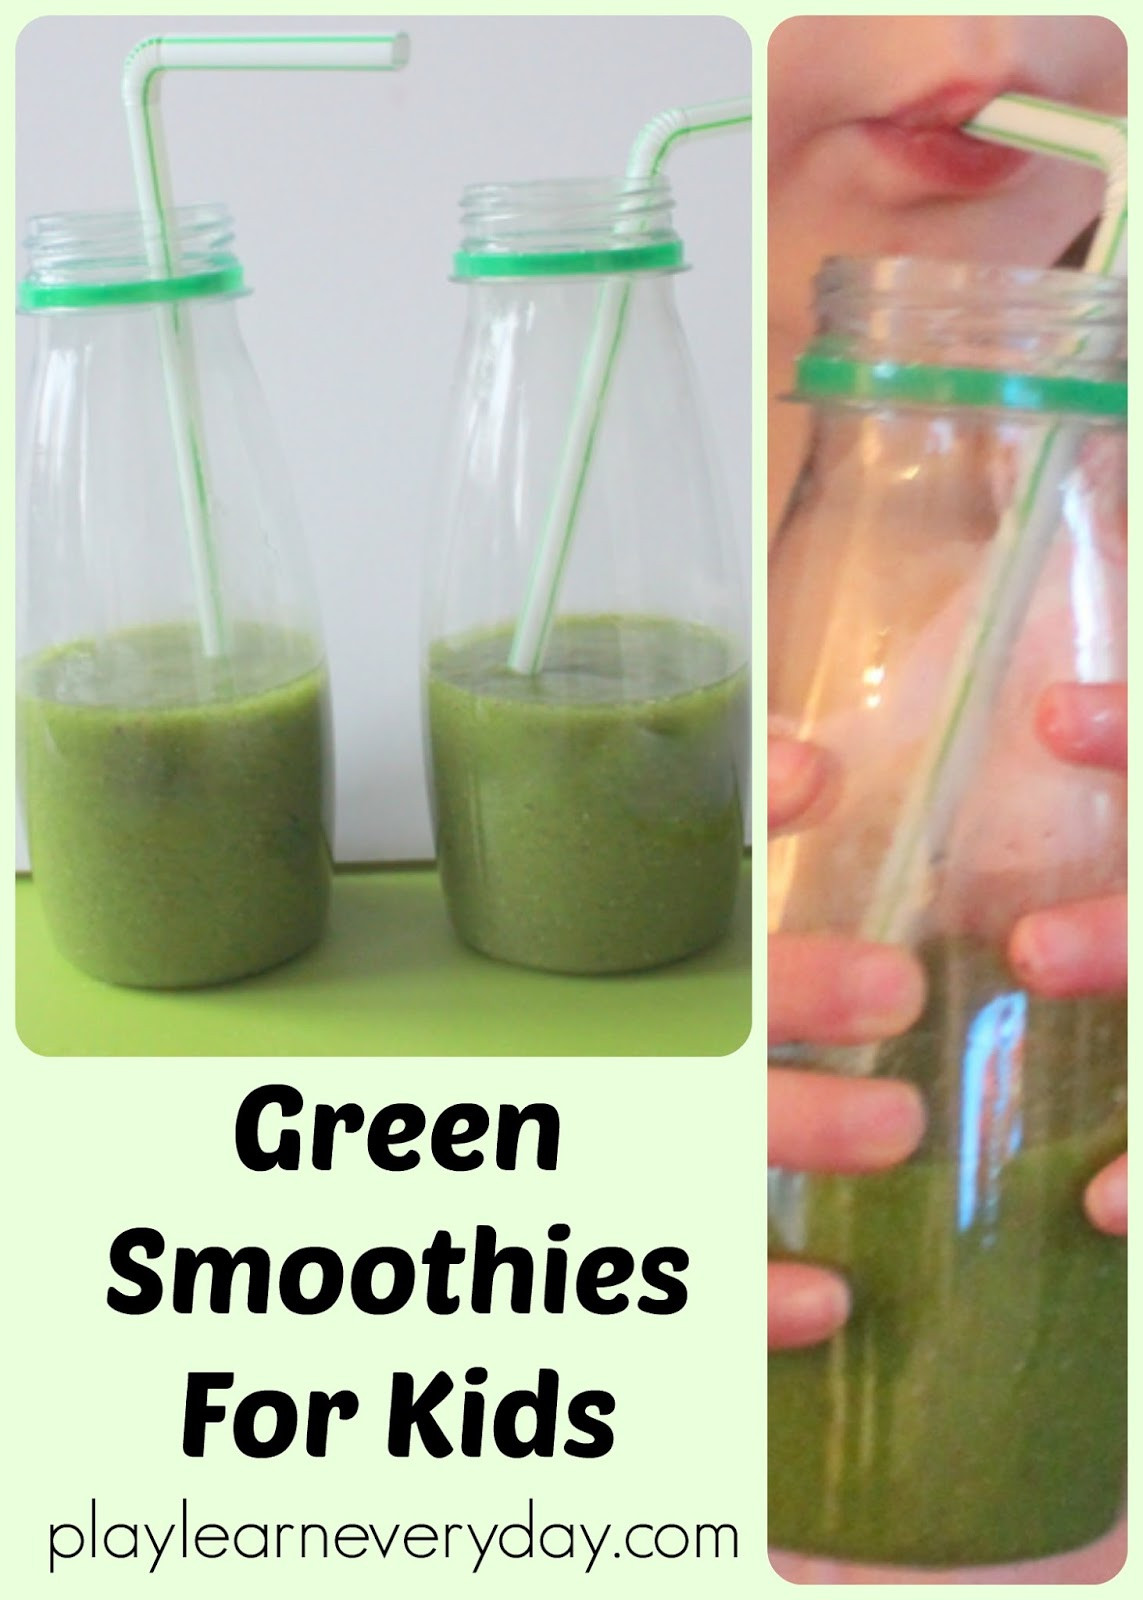 Green Smoothies For Kids
 Green Smoothies for Kids Play and Learn Every Day